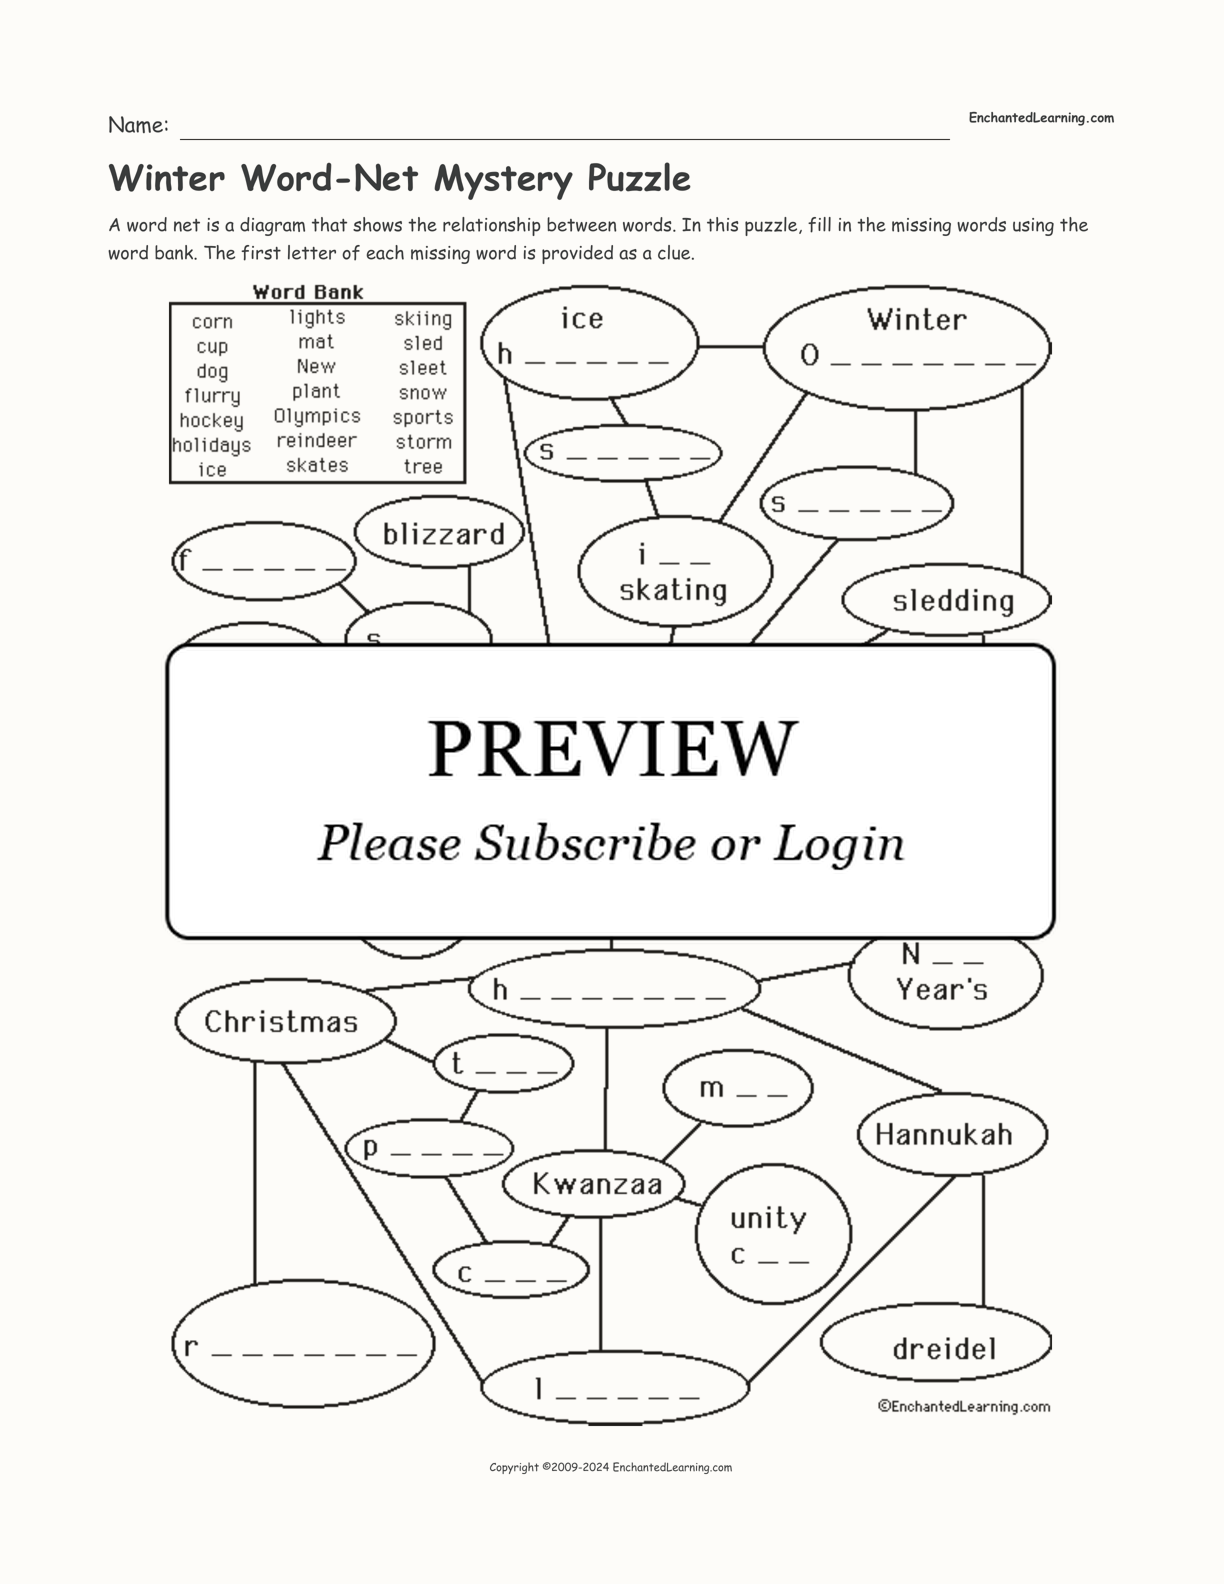 Winter Word-Net Mystery Puzzle interactive worksheet page 1